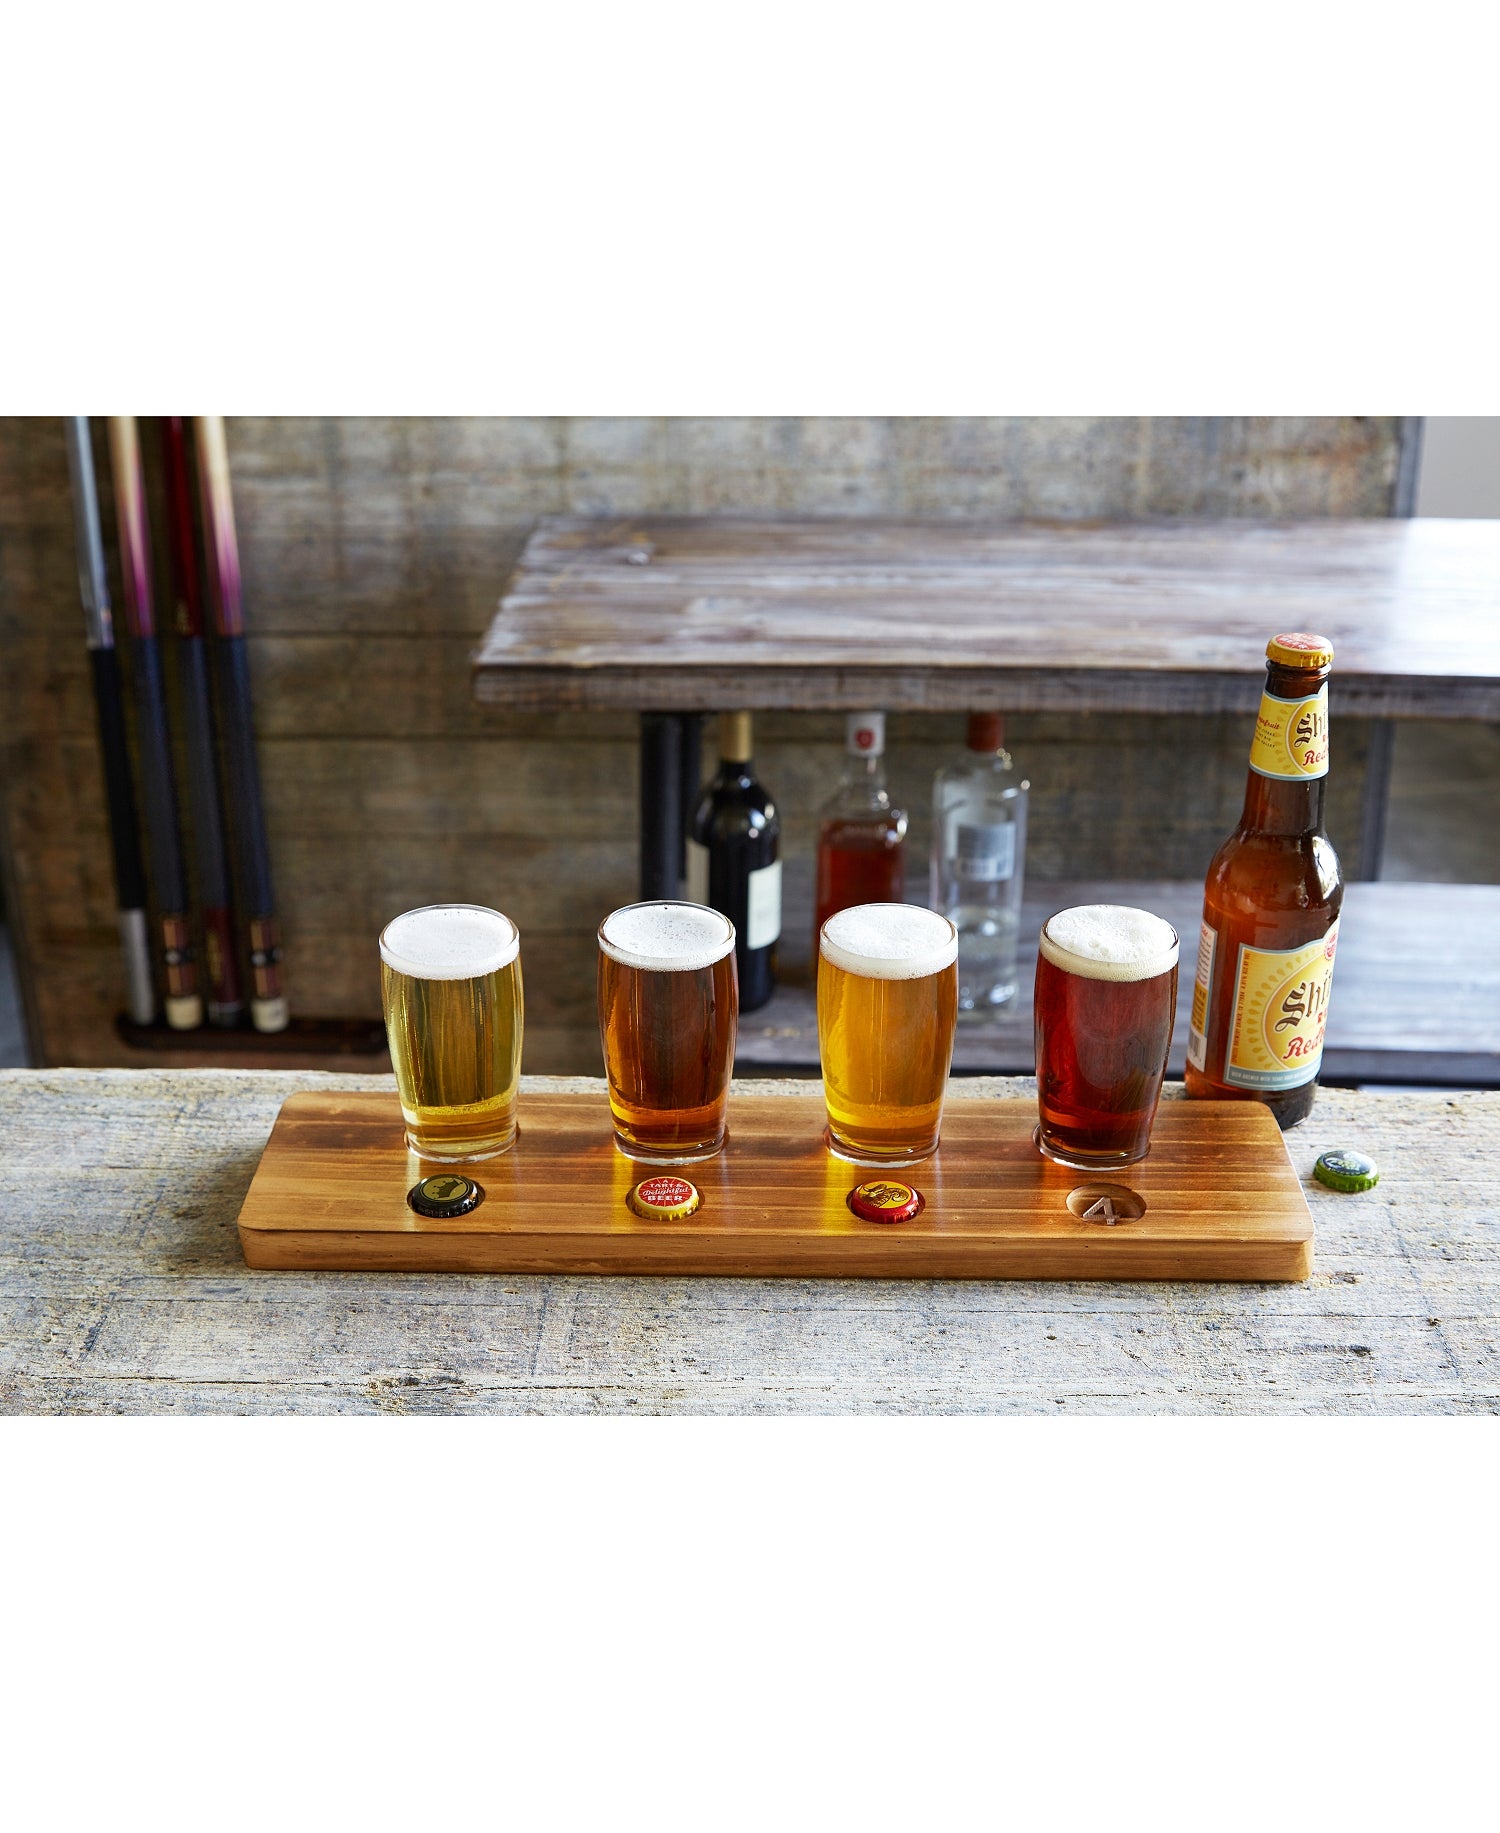 Studio Mercantile Beer Tasting Flight Set Wood Glass And Tray Set Of 5 Pieces